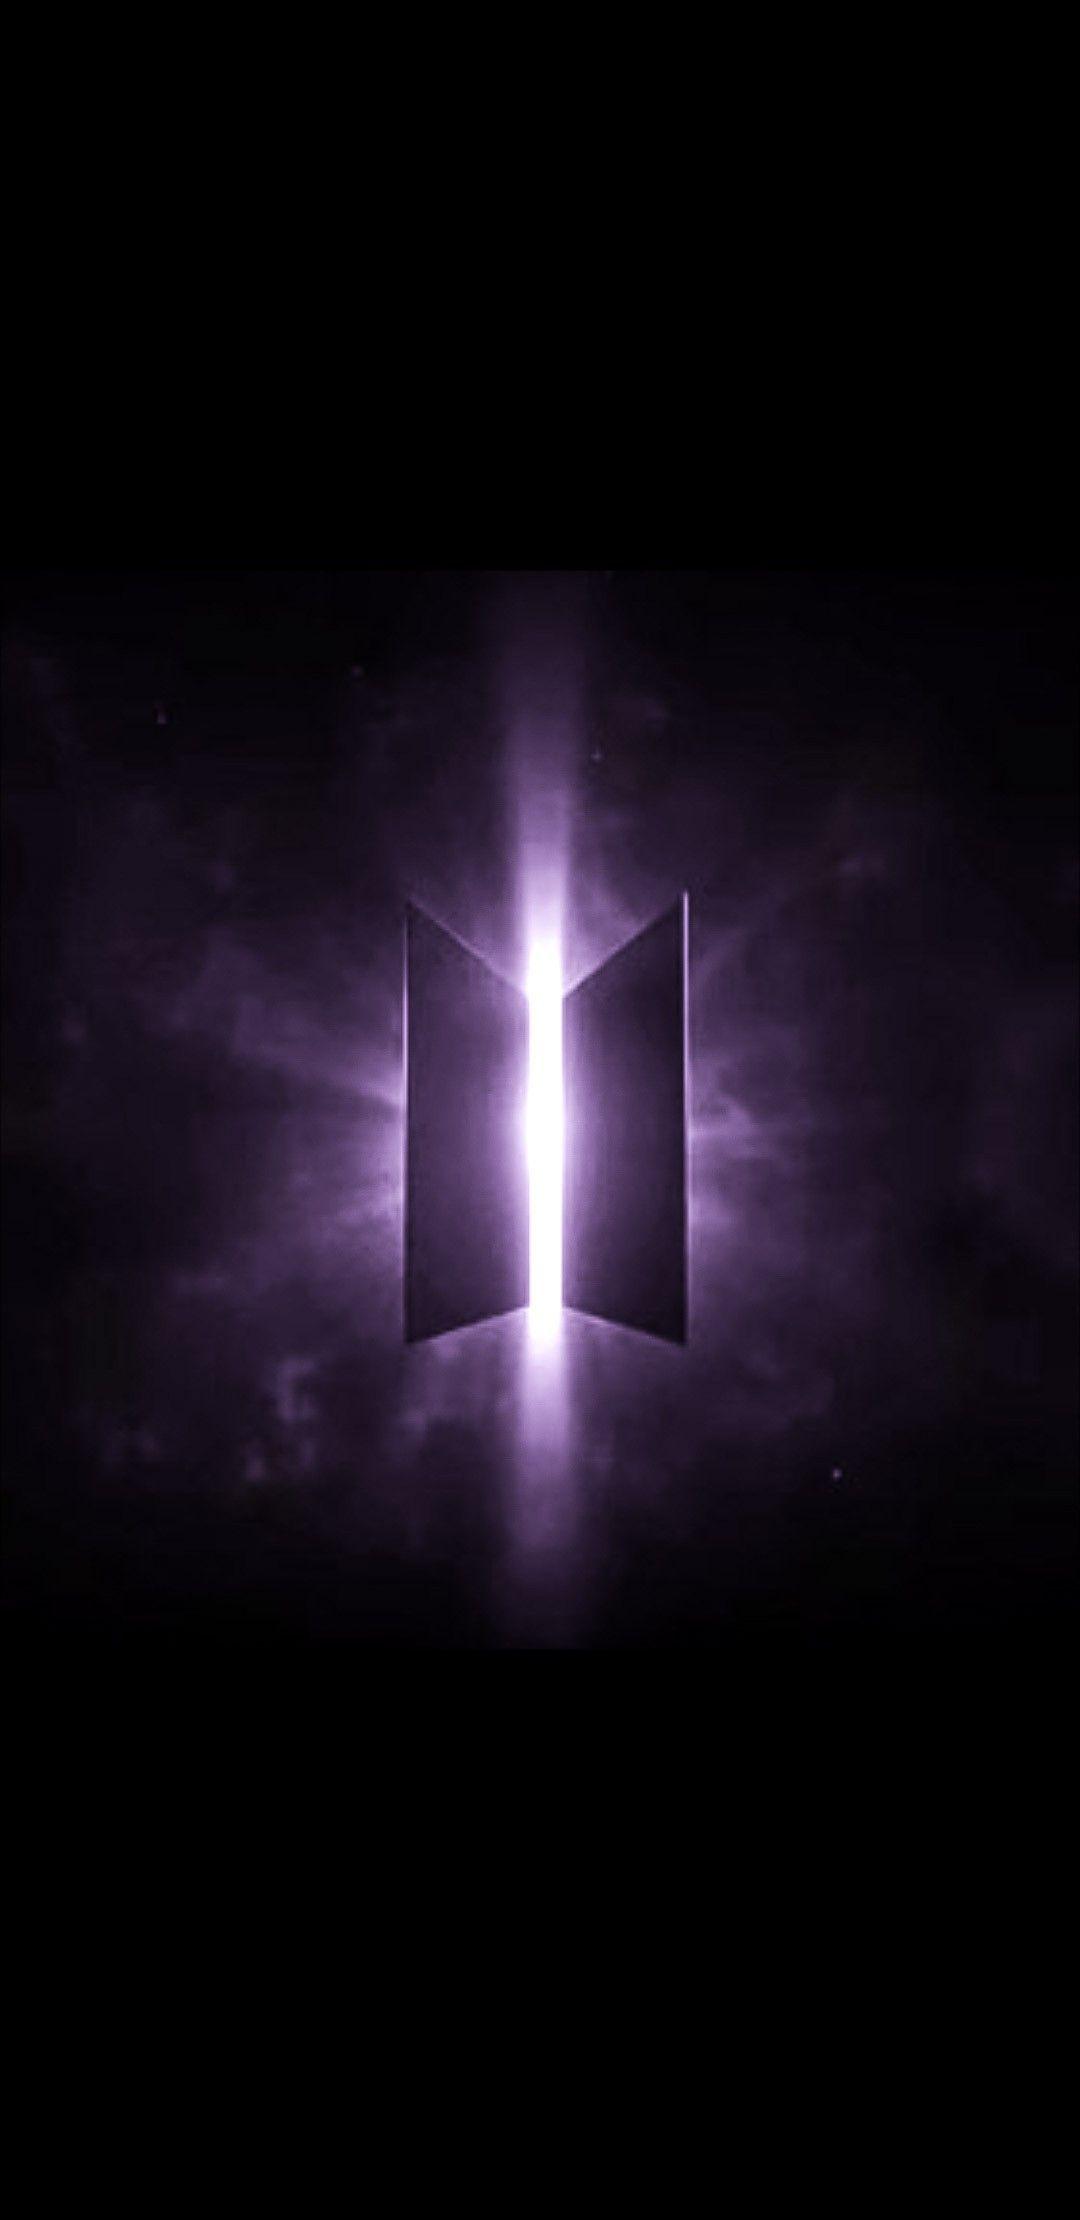 Featured image of post Bts Wallpaer Logo / Ultra hd 4k bts wallpapers for desktop, pc, laptop, iphone, android phone, smartphone, imac, macbook, tablet, mobile device.